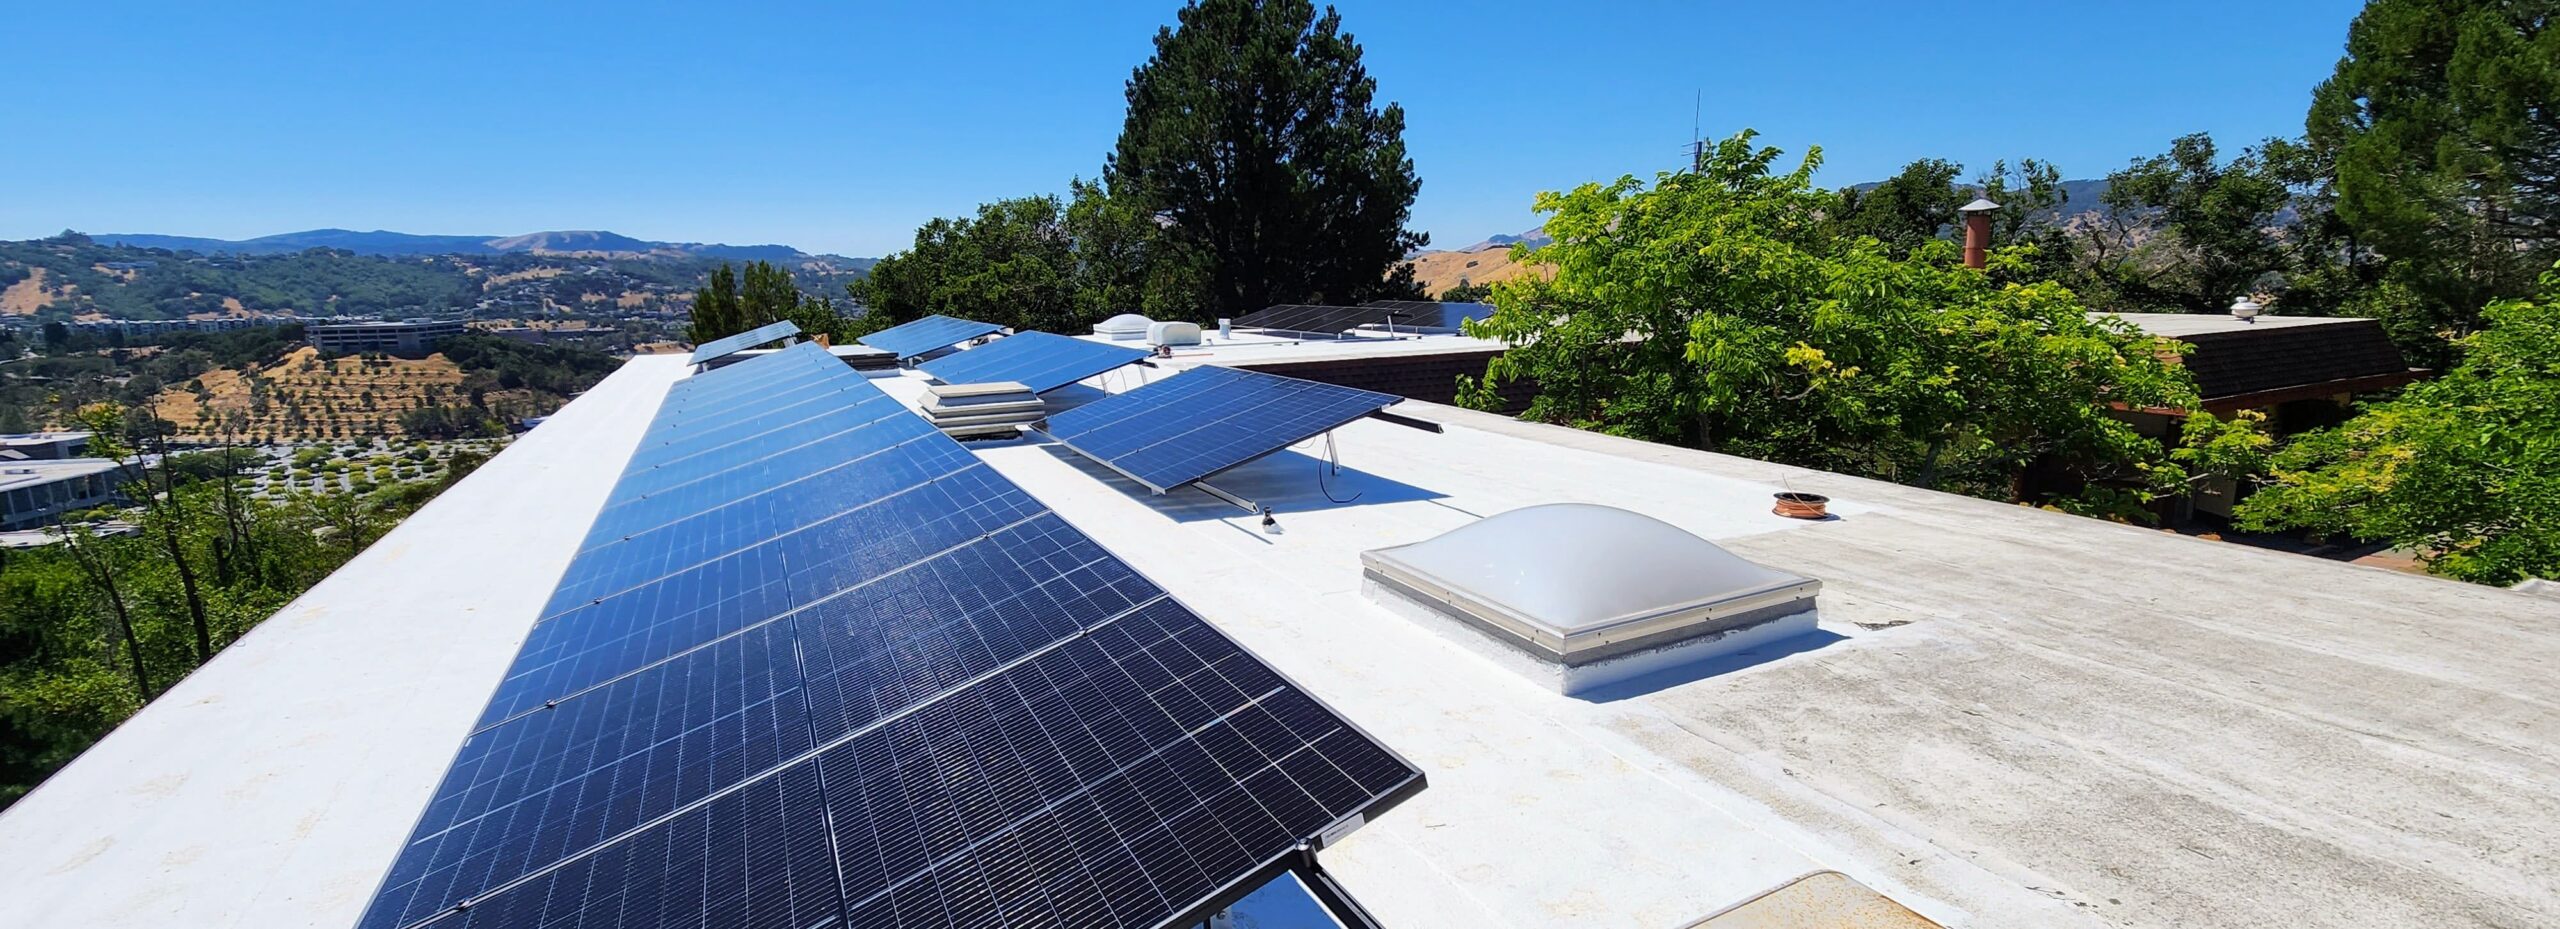 Installed rooftop solar panels